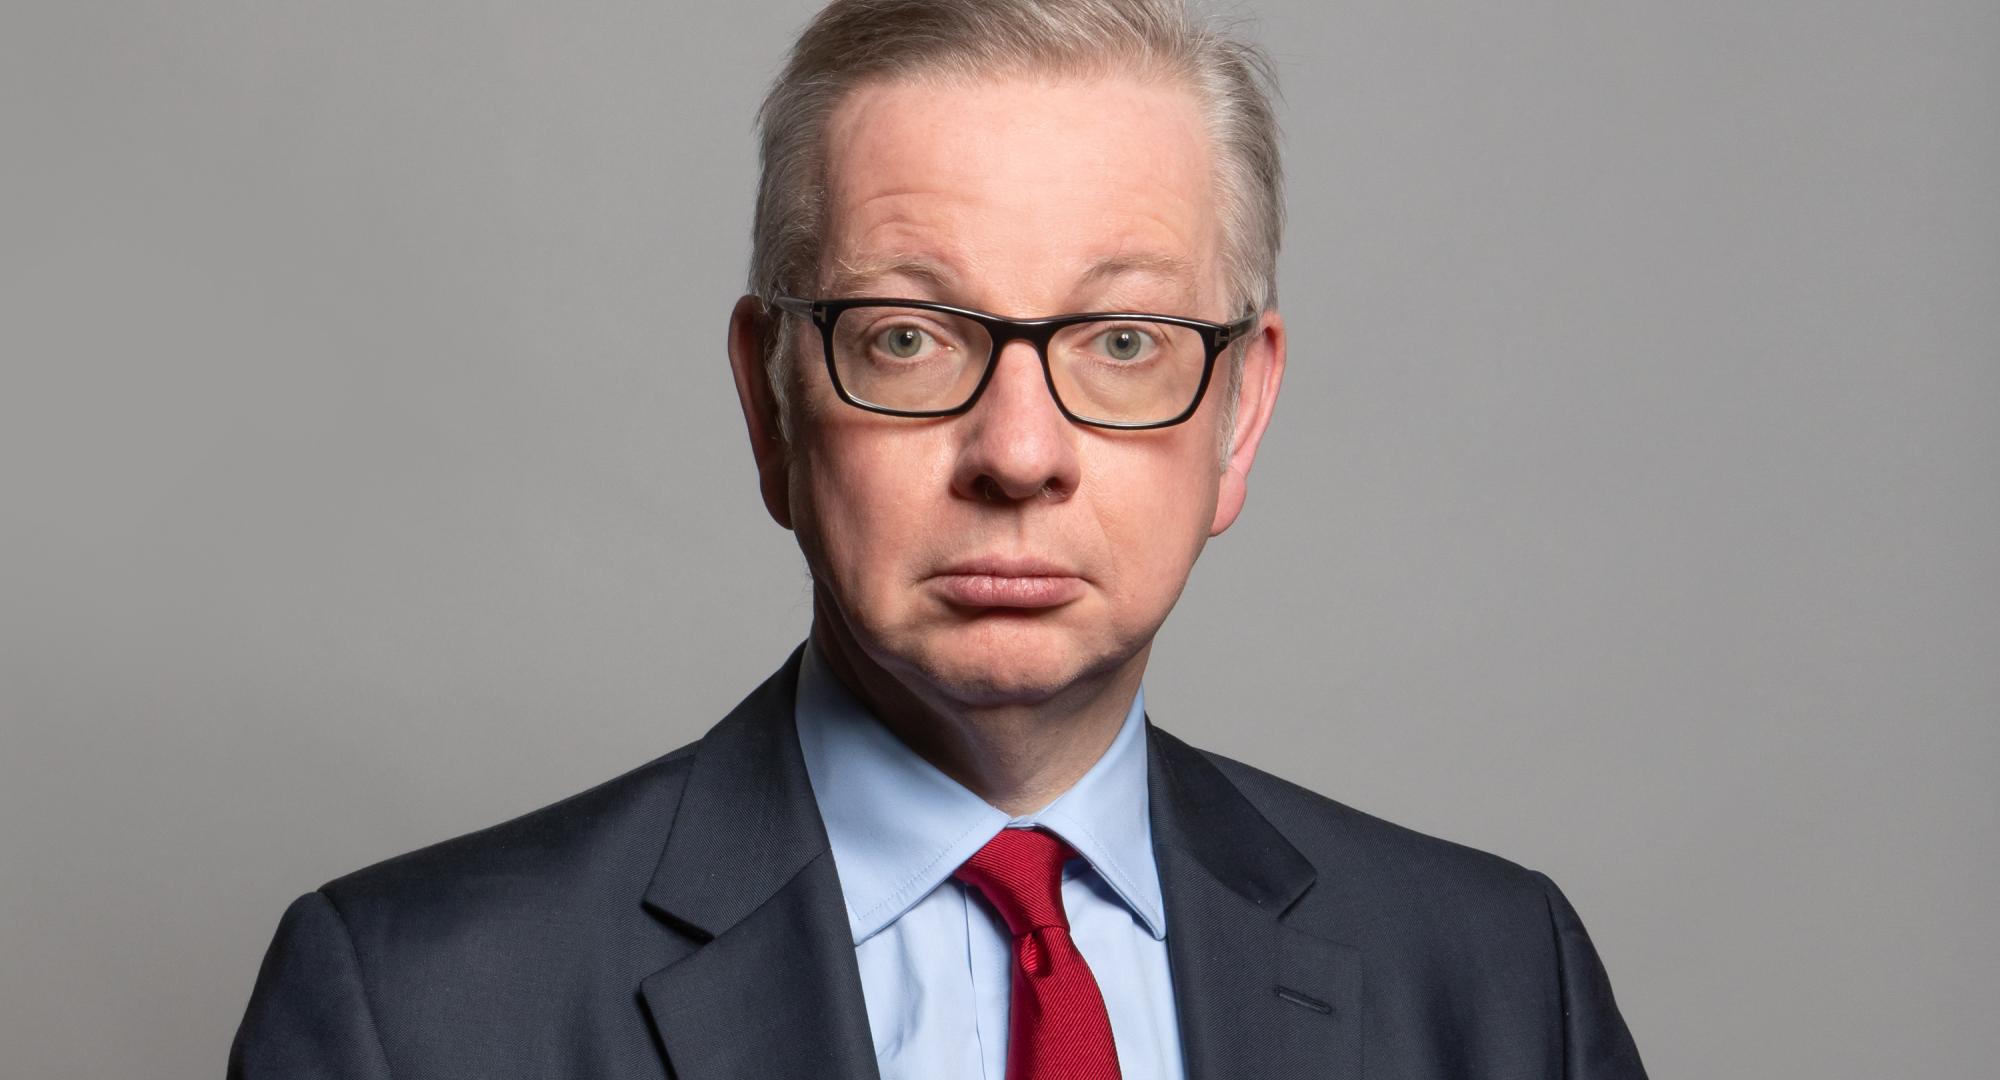 Official portrait of Michael Gove, UK Secretary of State